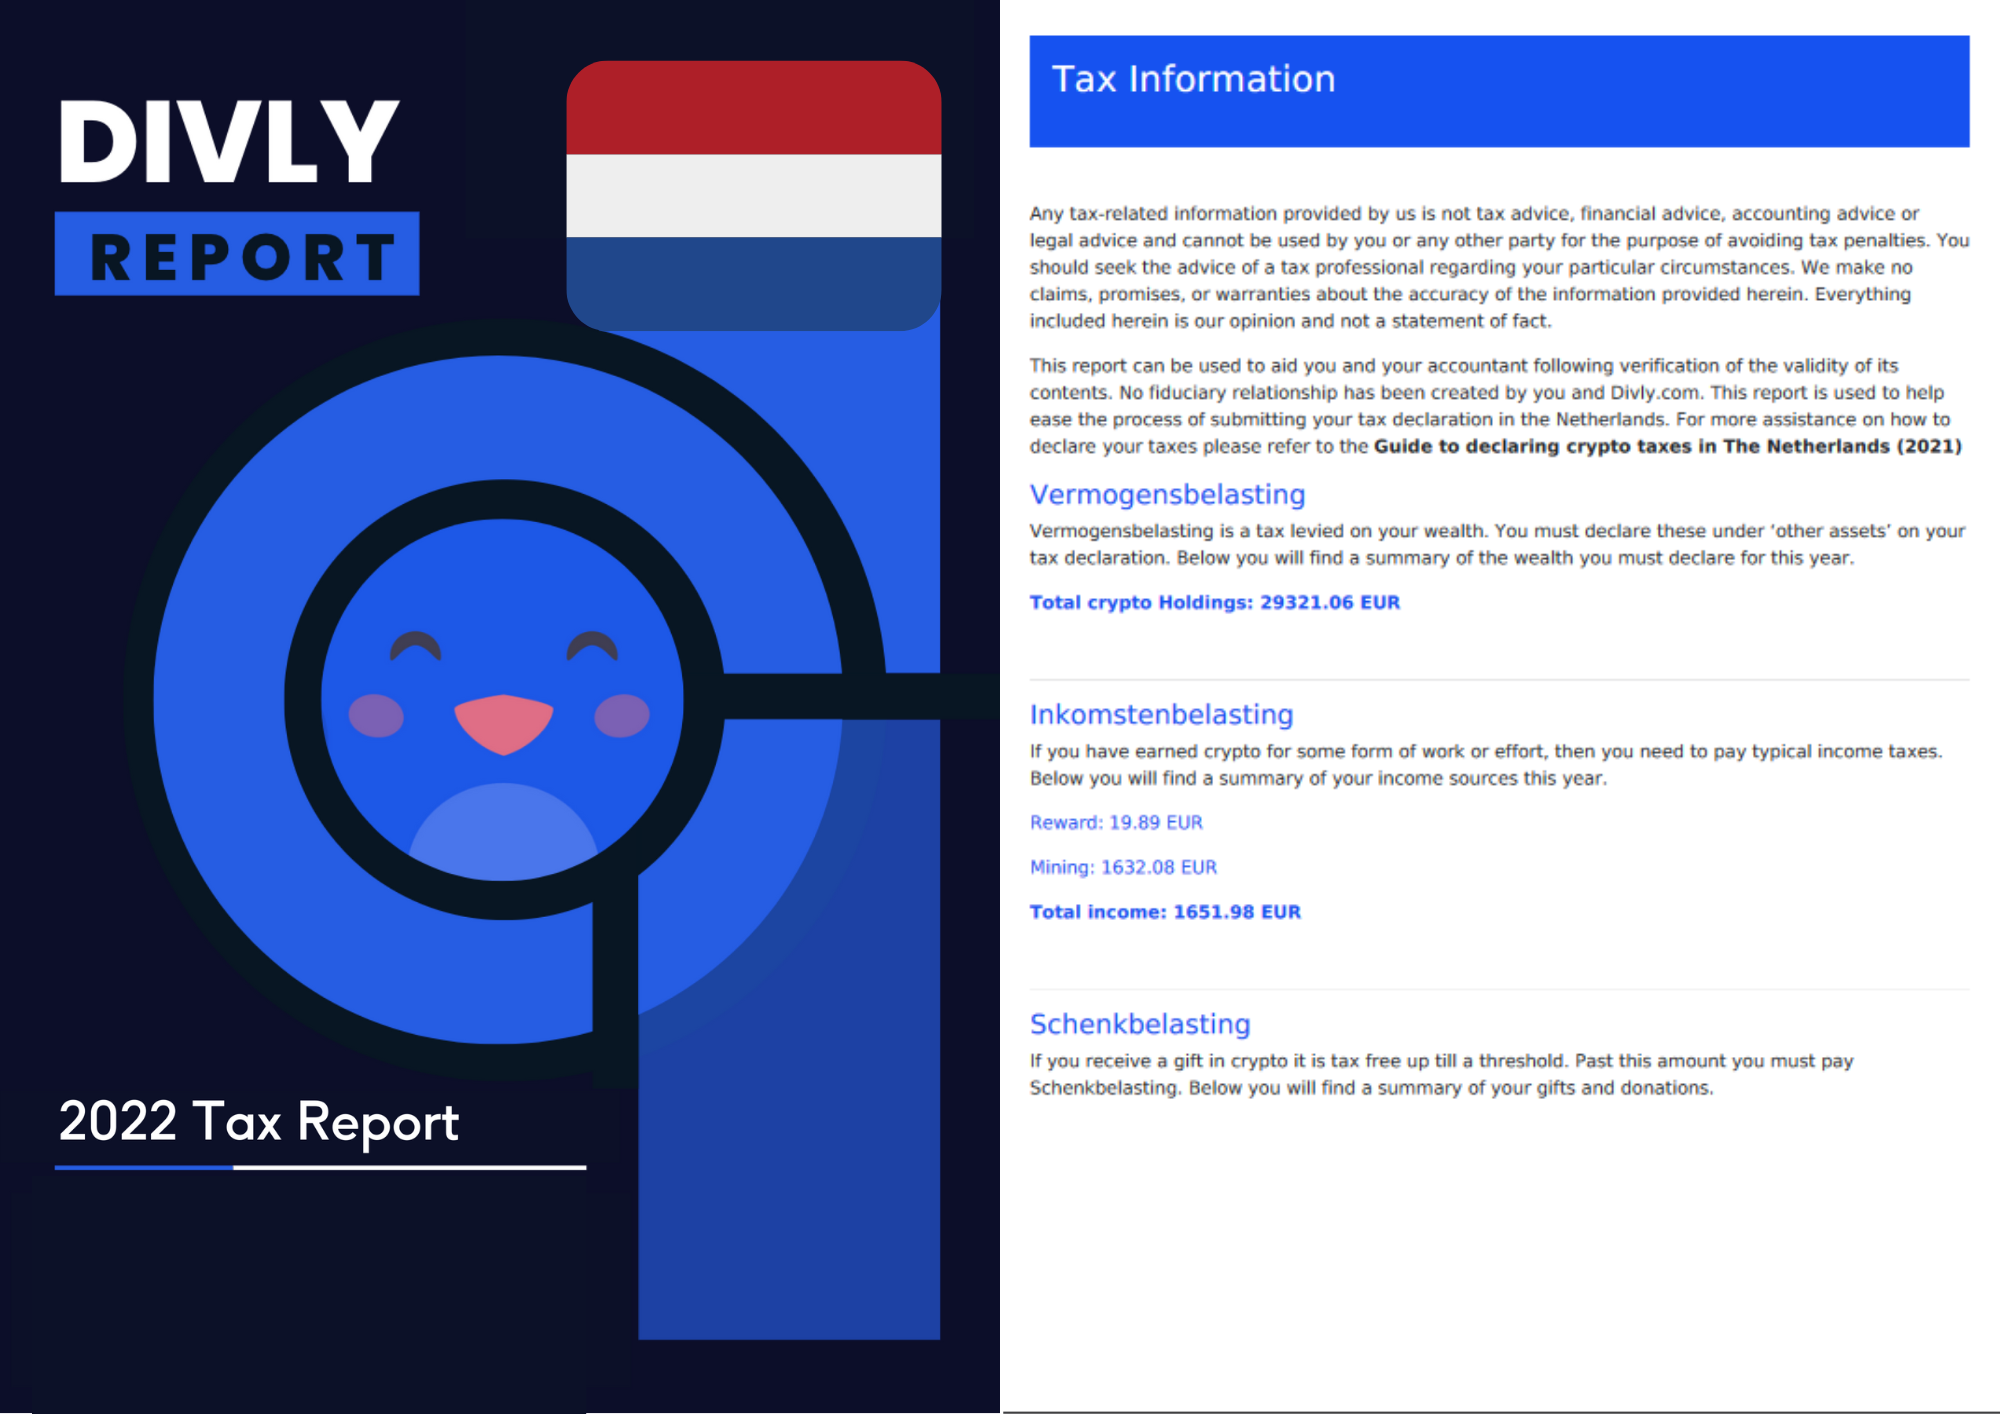 Divly's tax report has all the information needed for your crypto tax declaration